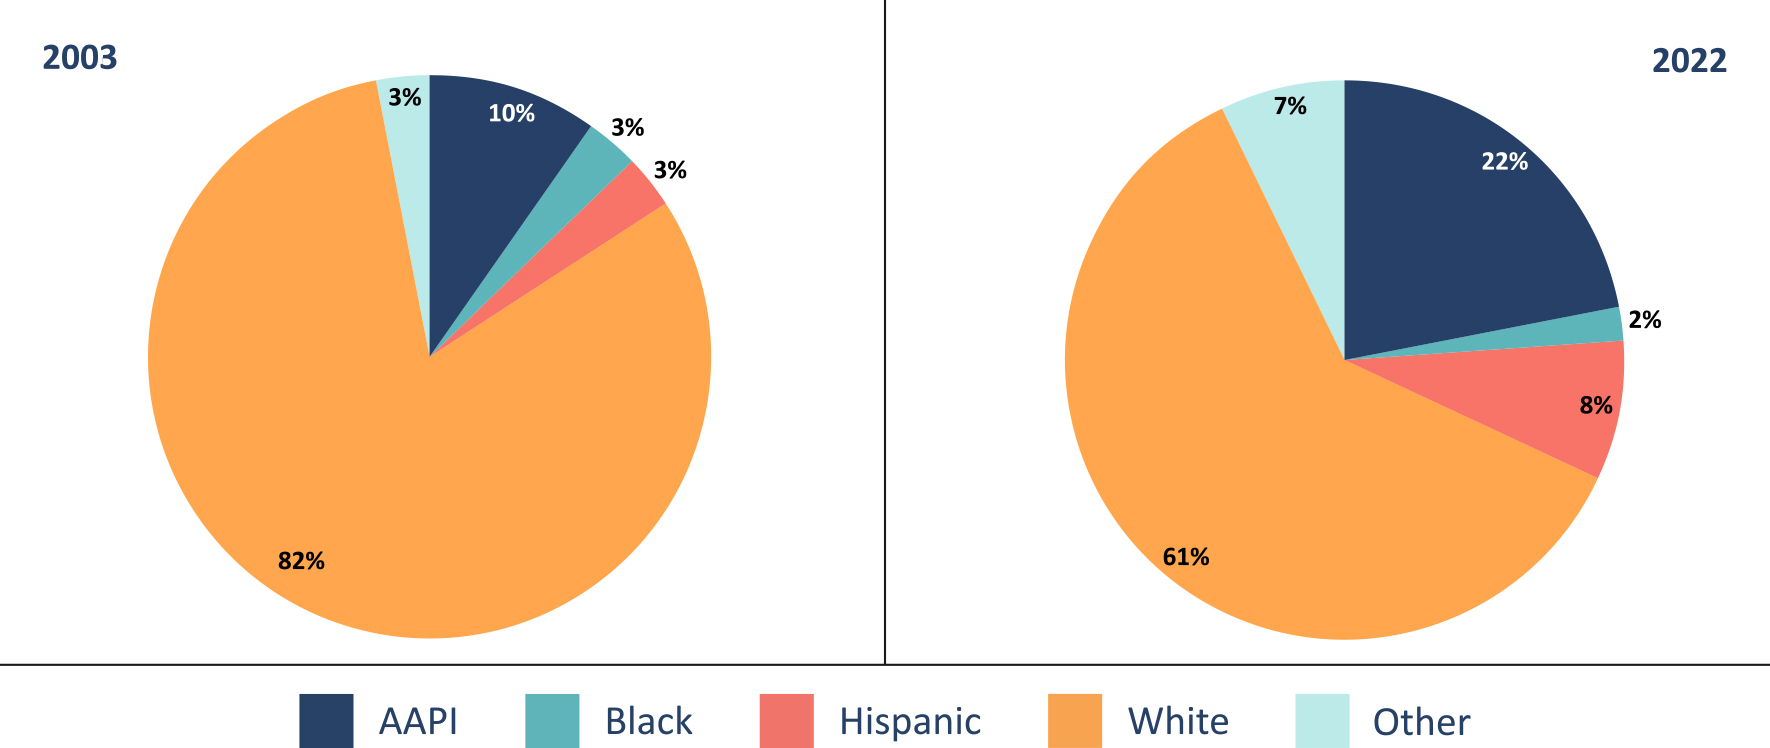 Figure FW-1. Racial composition of eighth grade students at the Advanced level in math in 2003 and in 2022